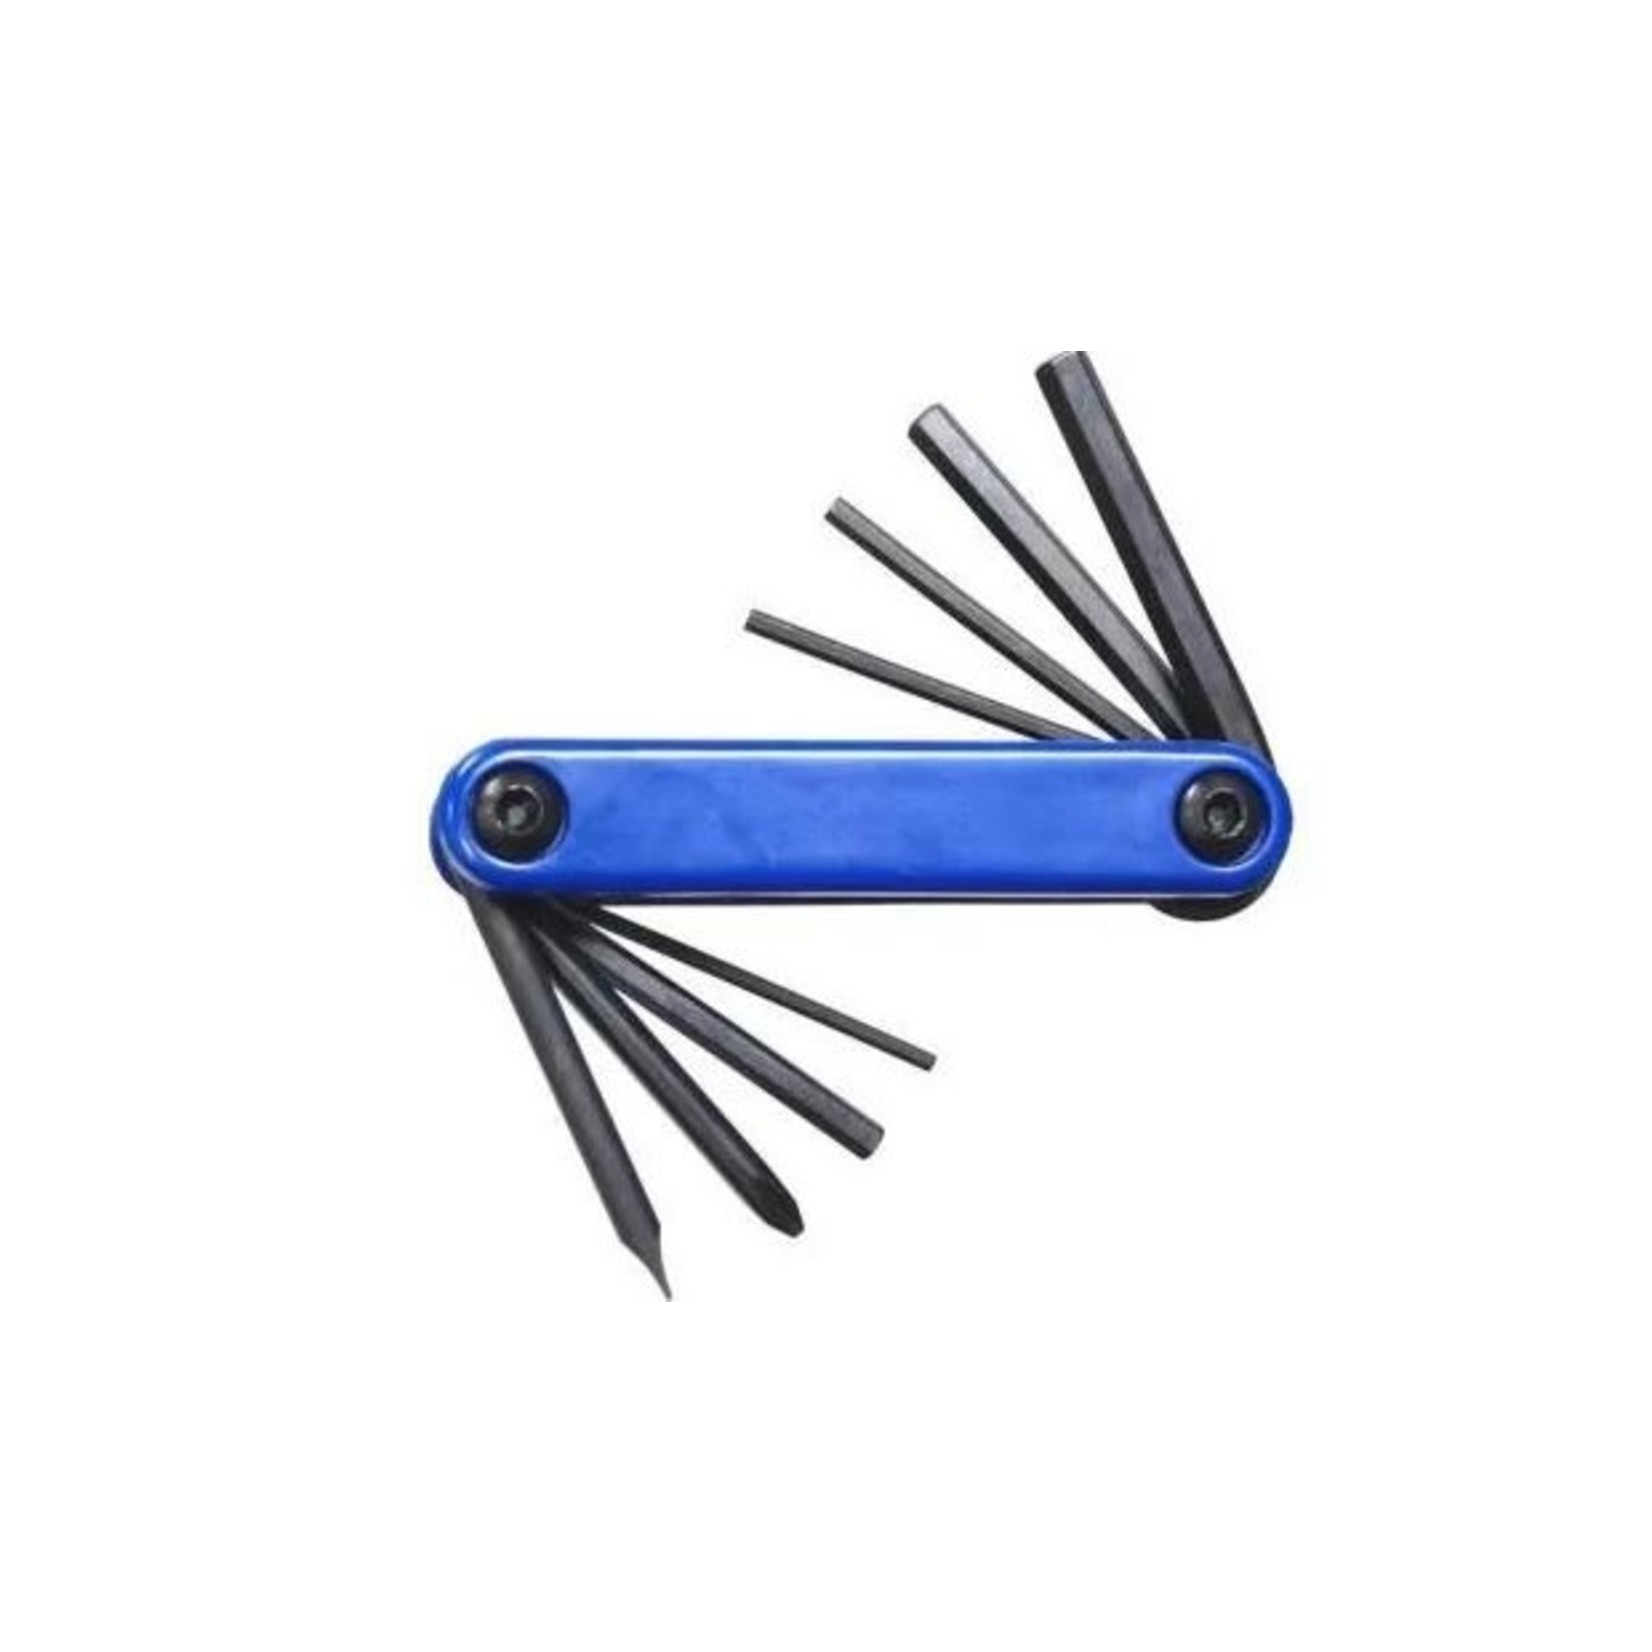 Incomex Trading Pty Ltd Pro-Series - Tool Set Folding Type Blue 8 Functions - 2/2.5/3/4/5/6/+/-